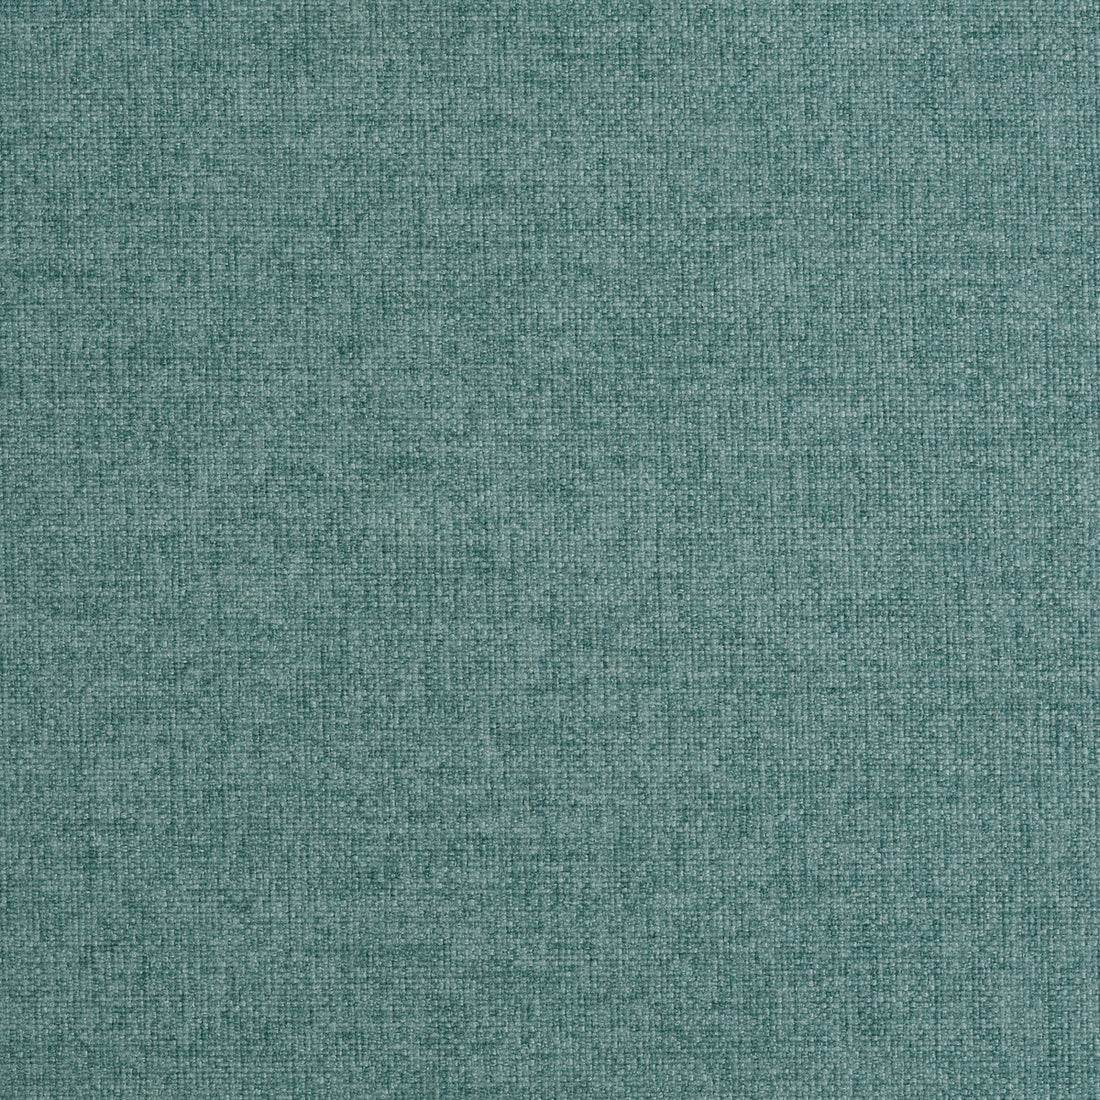 Kravet Smart fabric in 35121-35 color - pattern 35121.35.0 - by Kravet Smart in the Performance Crypton Home collection